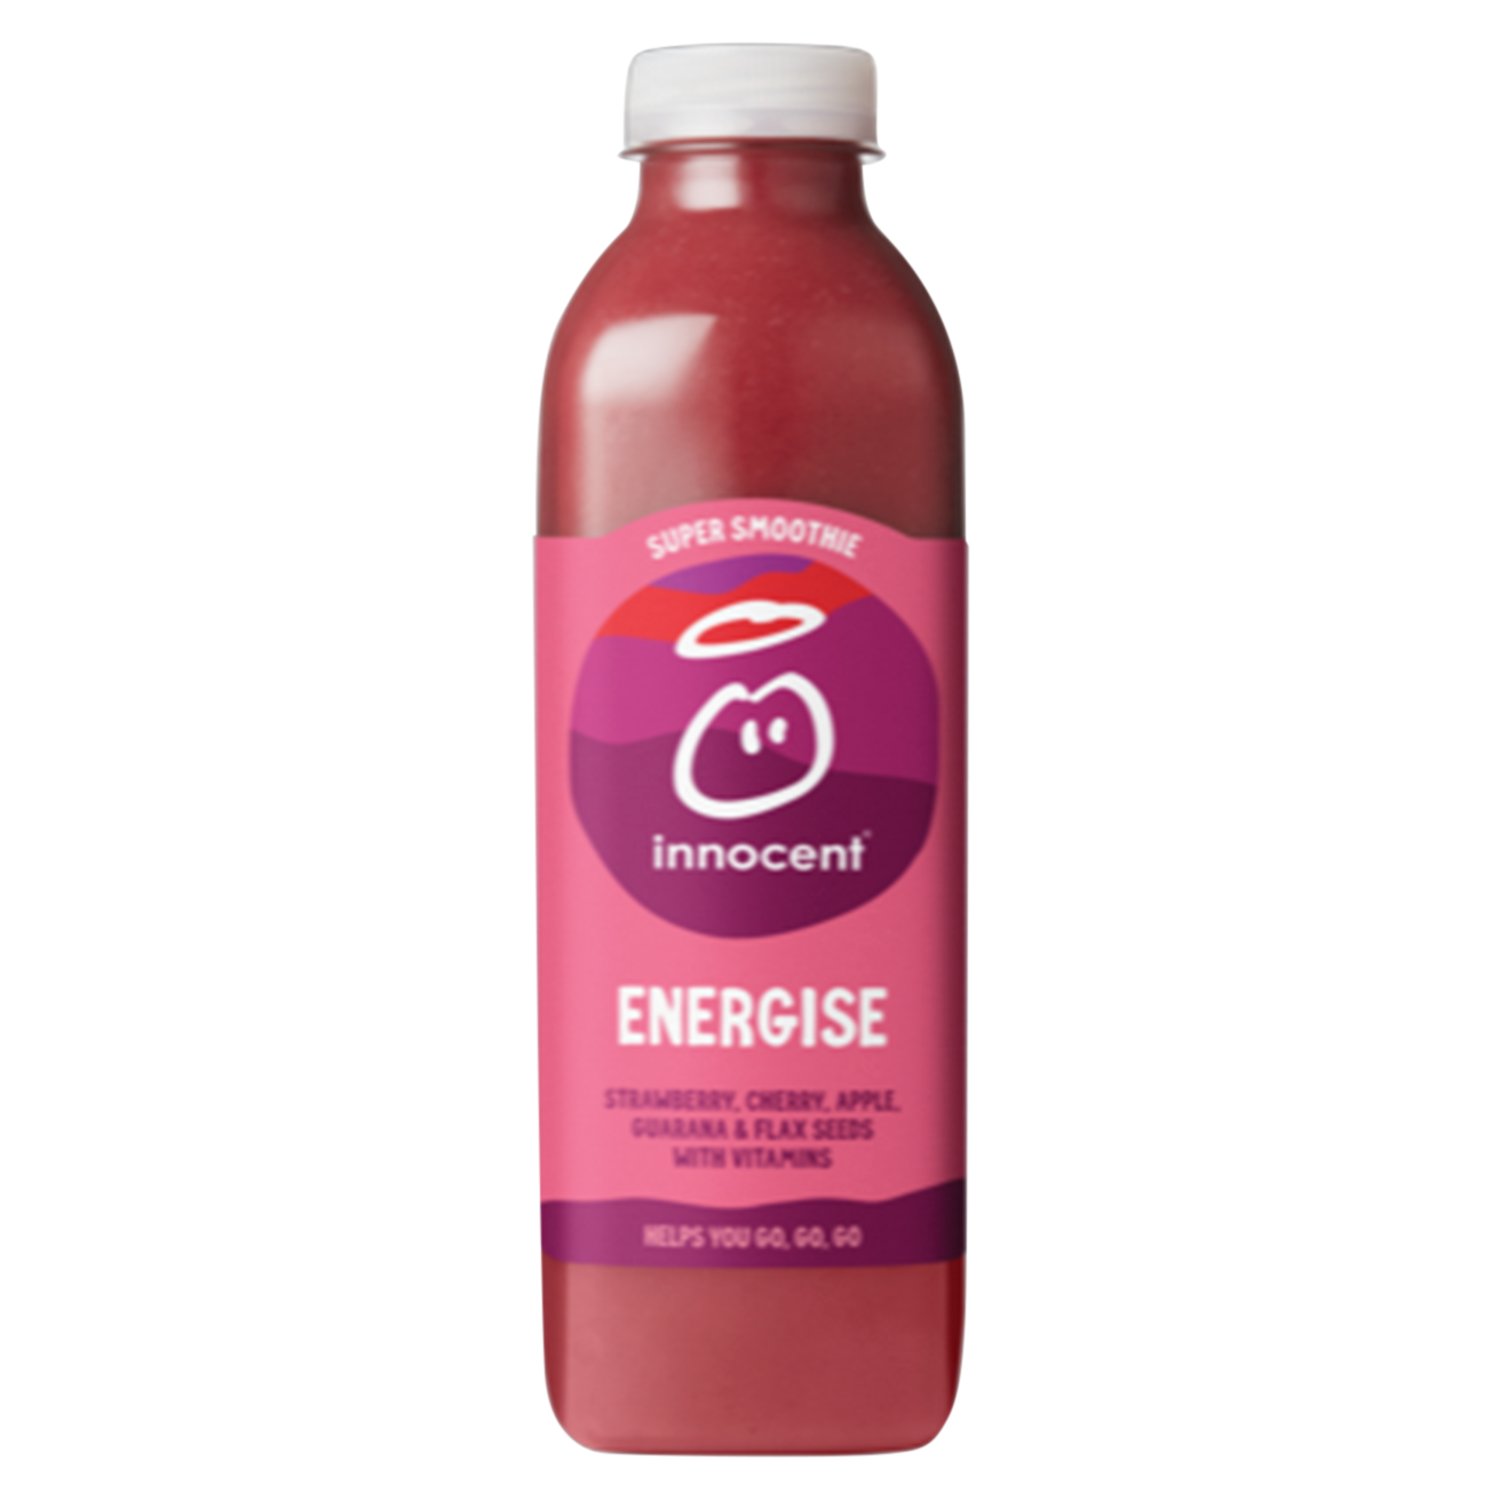 innocent Energise Strawberry & Cherry Super Smoothie is a blend of crushed fruit and vegetables, pure juices, milled seeds, botanicals and vitamins, making it the perfect snack for when you need a pick me up or boost. No added sugar.*

This nourishing smoothie is high in vitamins B1, B2, B3 and B6 which can contribute to normal energy yielding metabolism, and vitamin C which can help reduce tiredness and fatigue. 

It includes 3 1/2 pressed apples (50%), 33 pressed red and white grapes, 1 1/2 mashed bananas, 7 crushed strawberries (10%), 34 crushed blackcurrants, 7 crushed cherries (3.3%), a splash of pressed beetroot, some milled flax seeds, some vitamins (B1, B2, B3, B6, C & E) and a dash of guarana infusion.

Suitable for vegans and pasteurised.

Keep refrigerated 0-8°C before and after opening. Once opened, drink within 4 days. 

The bottle is 100% recyclable, so please recycle when you're finished. We use partly recycled and fully recyclable bottles, refuse to air freight and source ethically

10% of our profits go to charity. See https://www.innocentdrinks.co.uk/things-we-do-for-people

*Contains naturally occurring sugars from fruit & veg. 